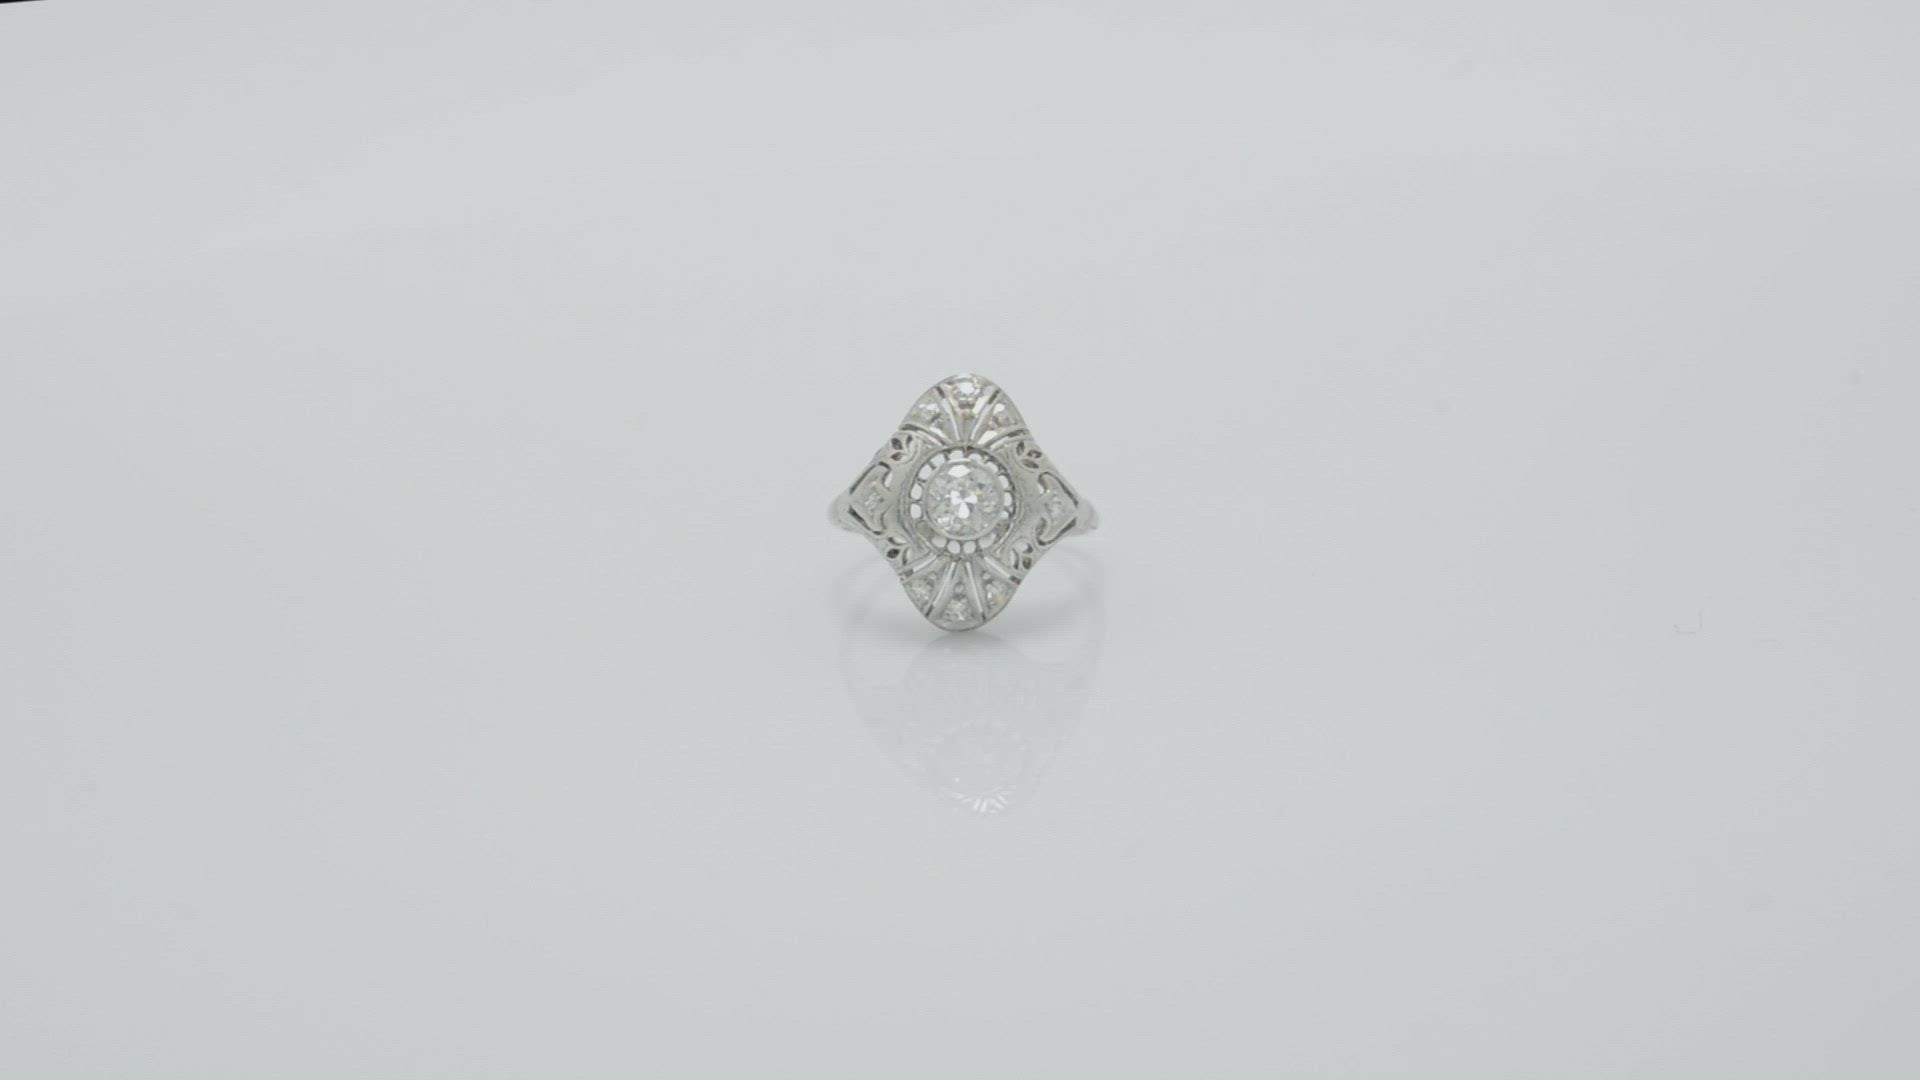 A classic platinum navette filigree design that could also be an engagement ring.